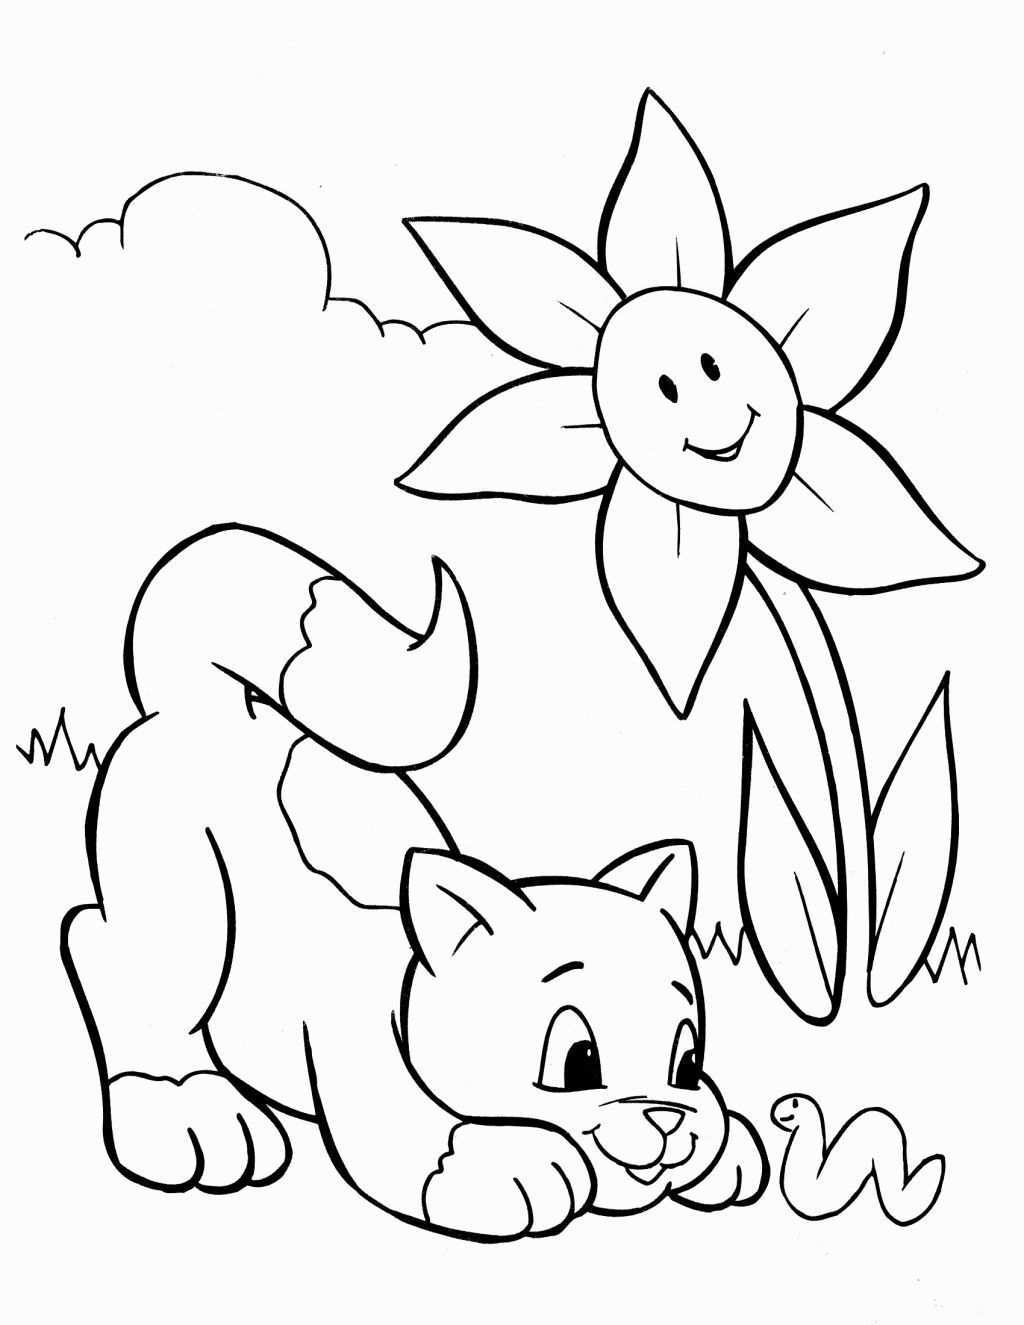 Crayola Coloring Pages For Kids Printable Easy Coloring Pages Coloring Pages Winter K